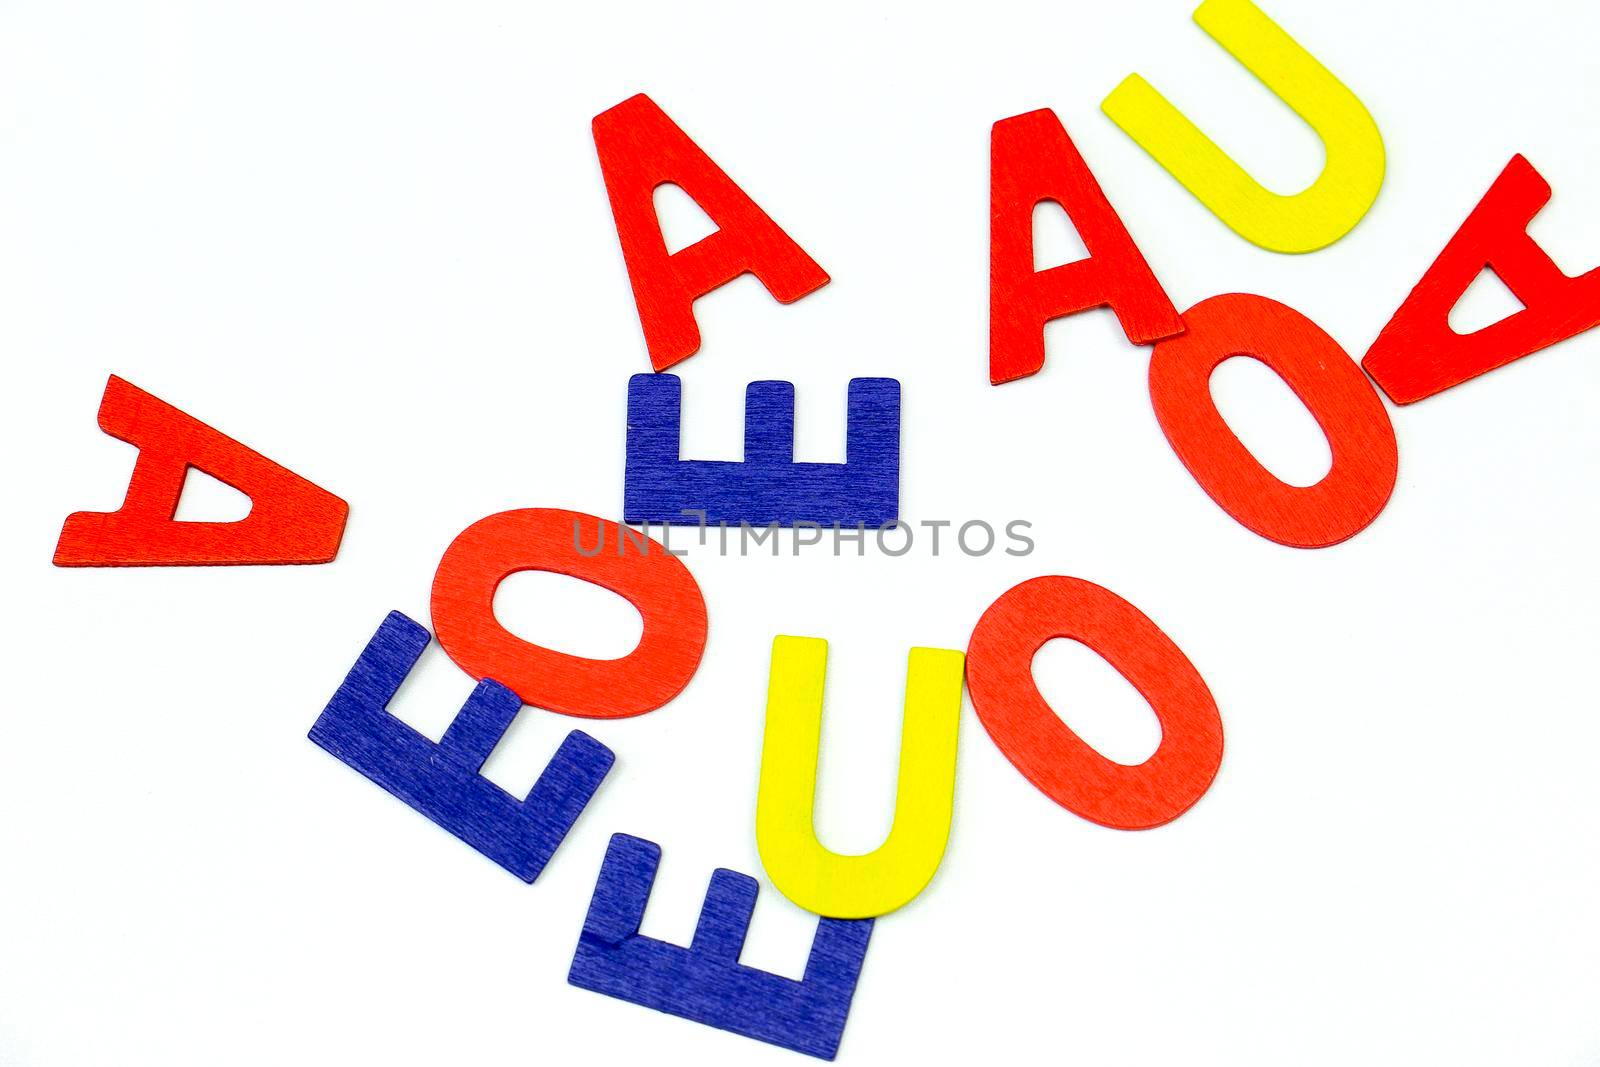 Multicolored vowels on white background by soniabonet